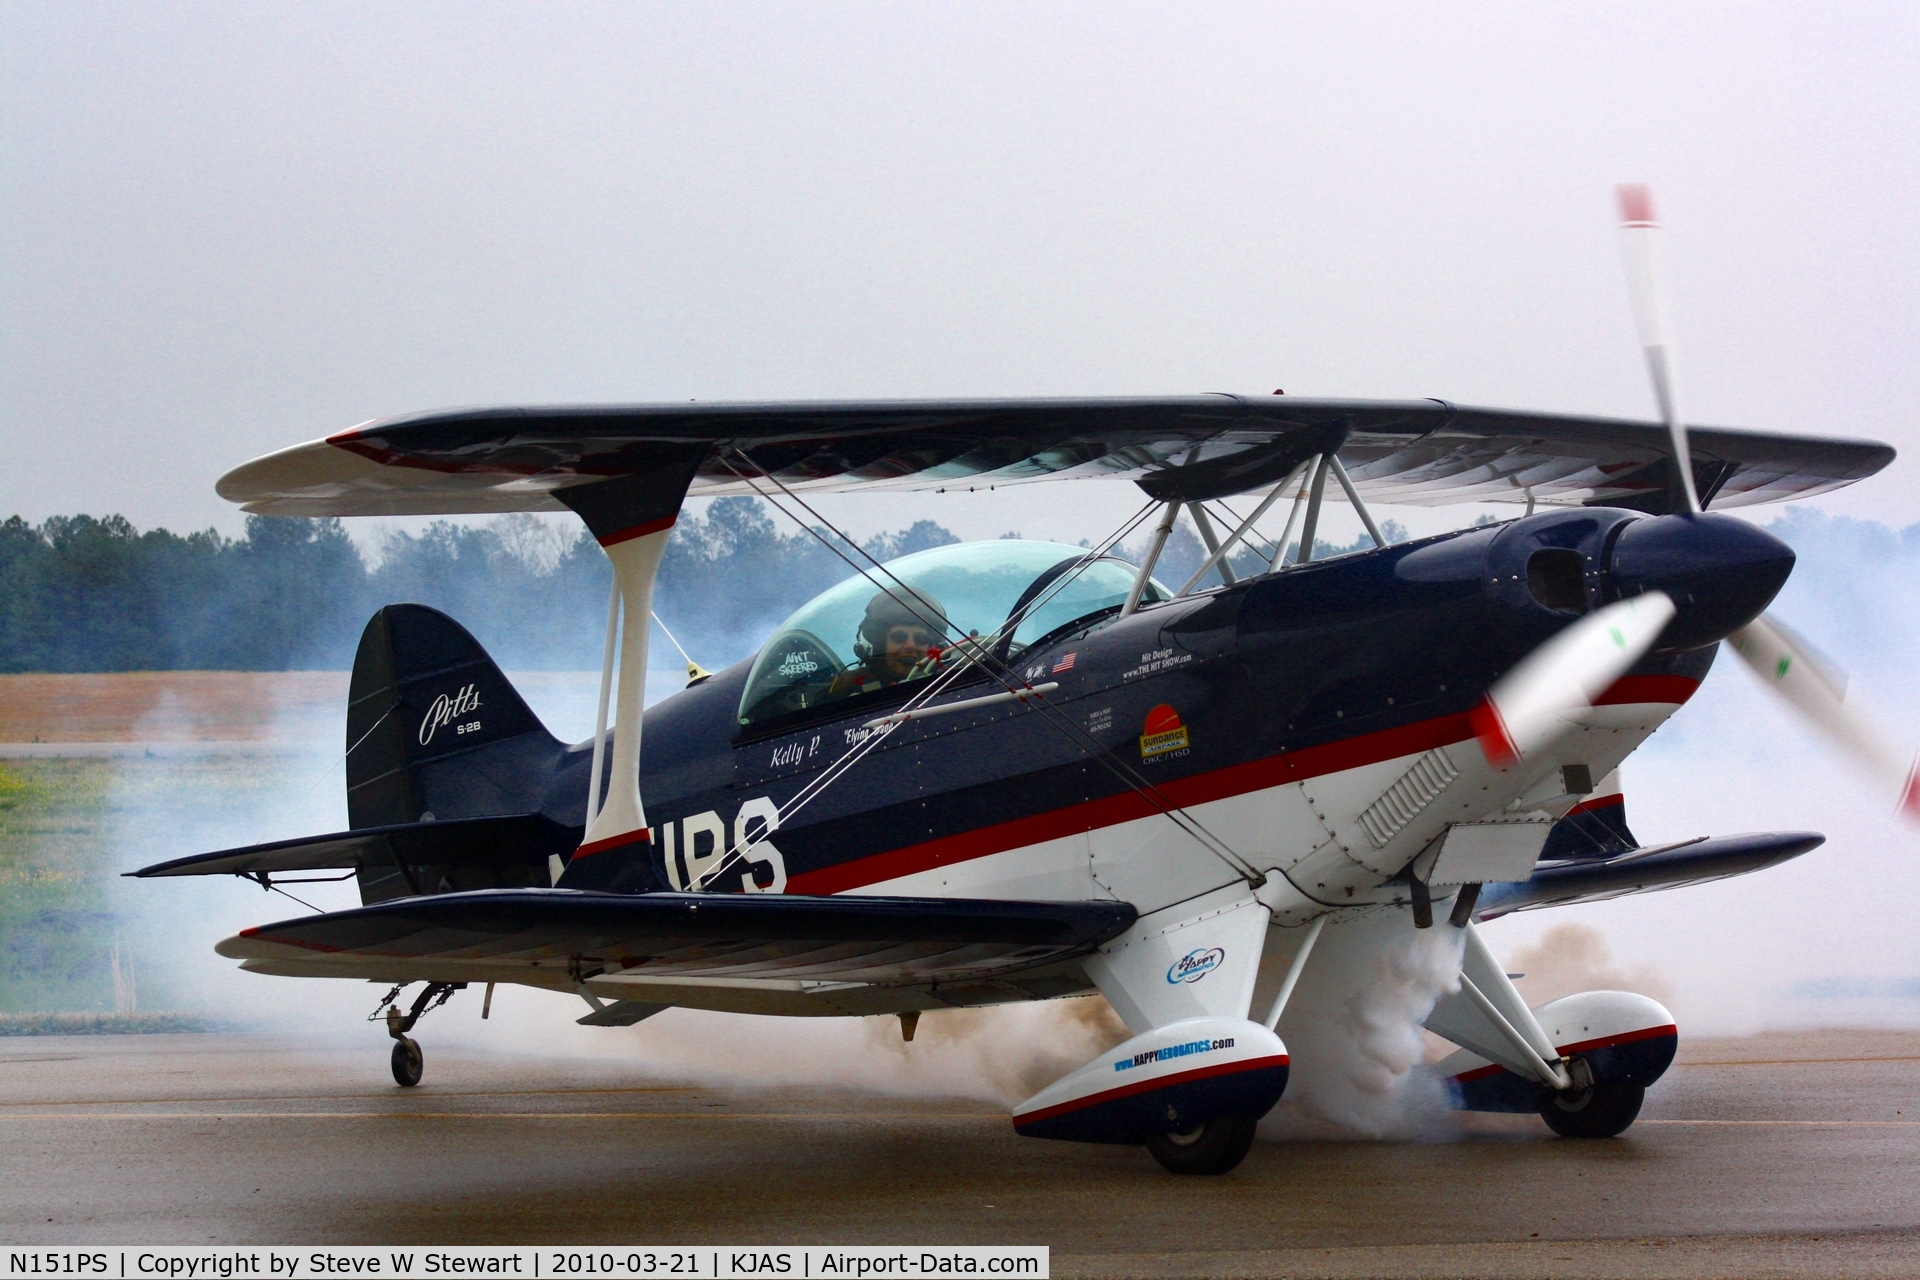 N151PS, 1994 Aviat Pitts S-2B Special C/N 5301, Kelly Pietrowicz, 